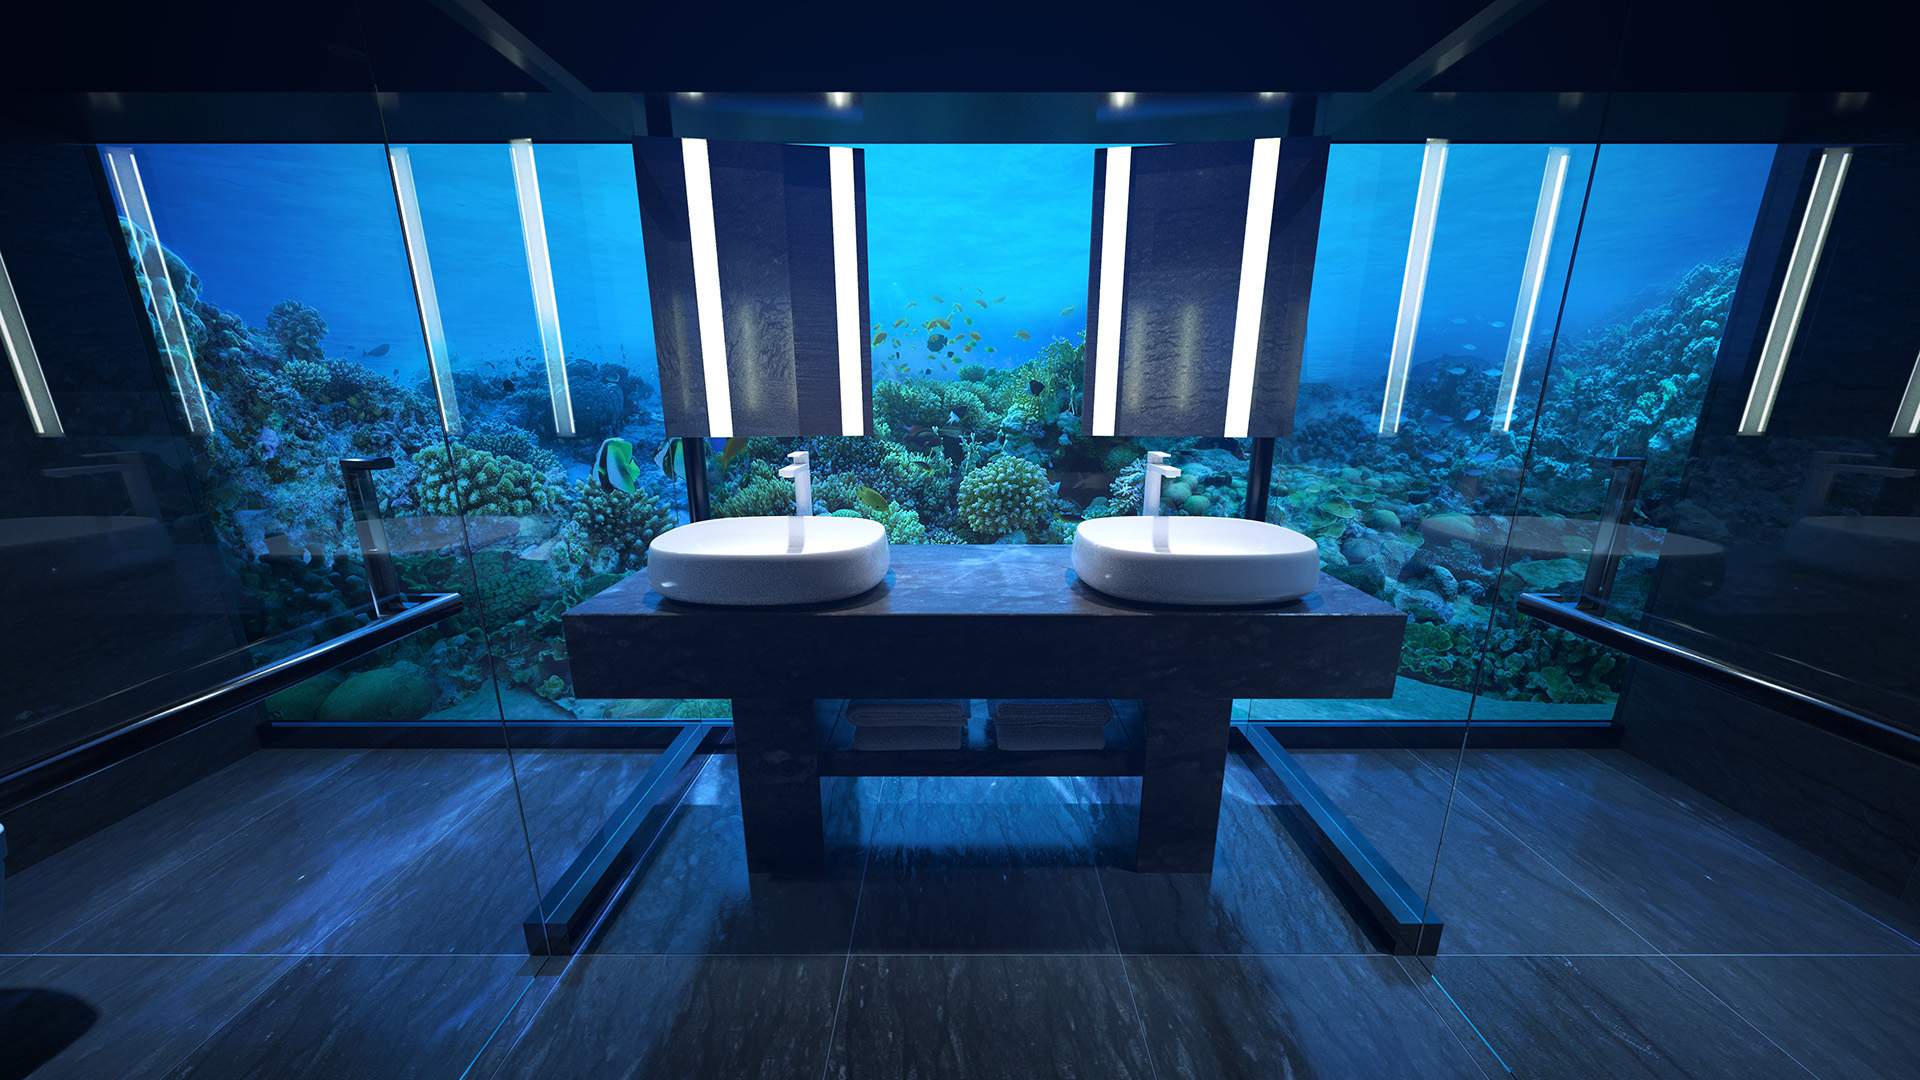 You'll Soon Be Able to Sleep Under the Sea at this Underwater Hotel in The Maldives